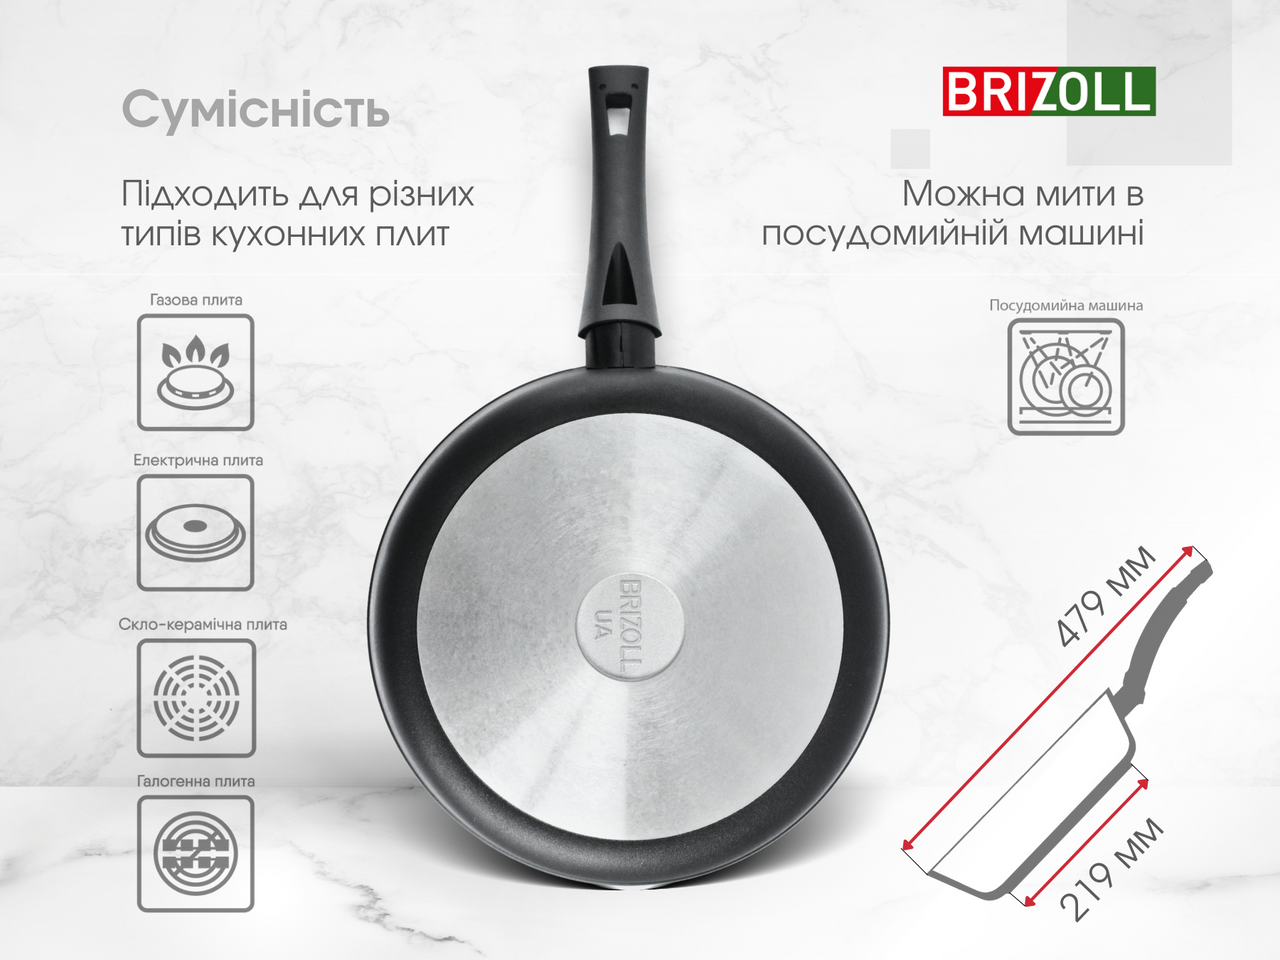 Frying pan 28 sm with non-stick coating GRAPHIT with a glass lid